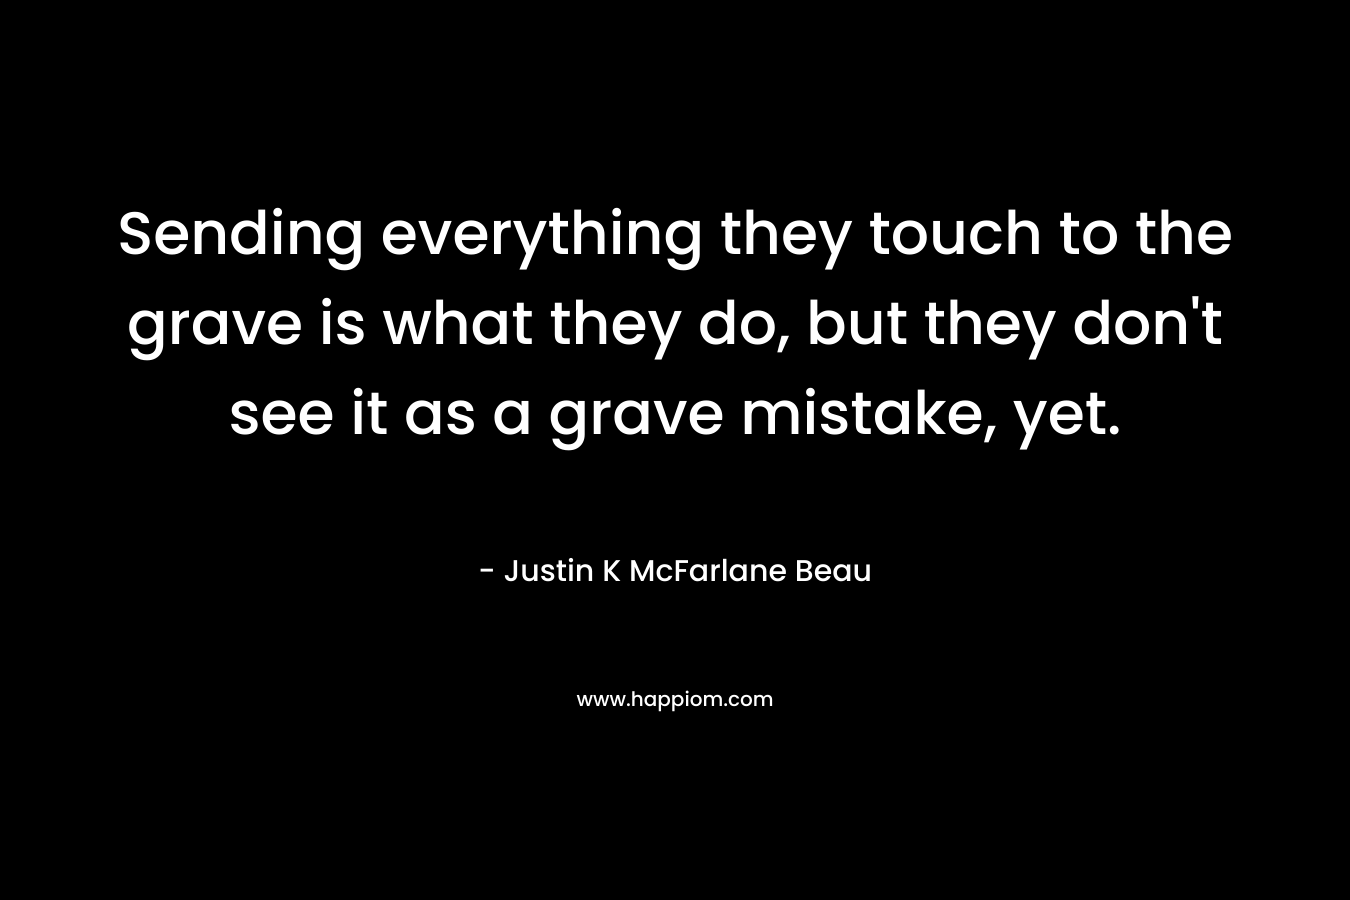 Sending everything they touch to the grave is what they do, but they don't see it as a grave mistake, yet.